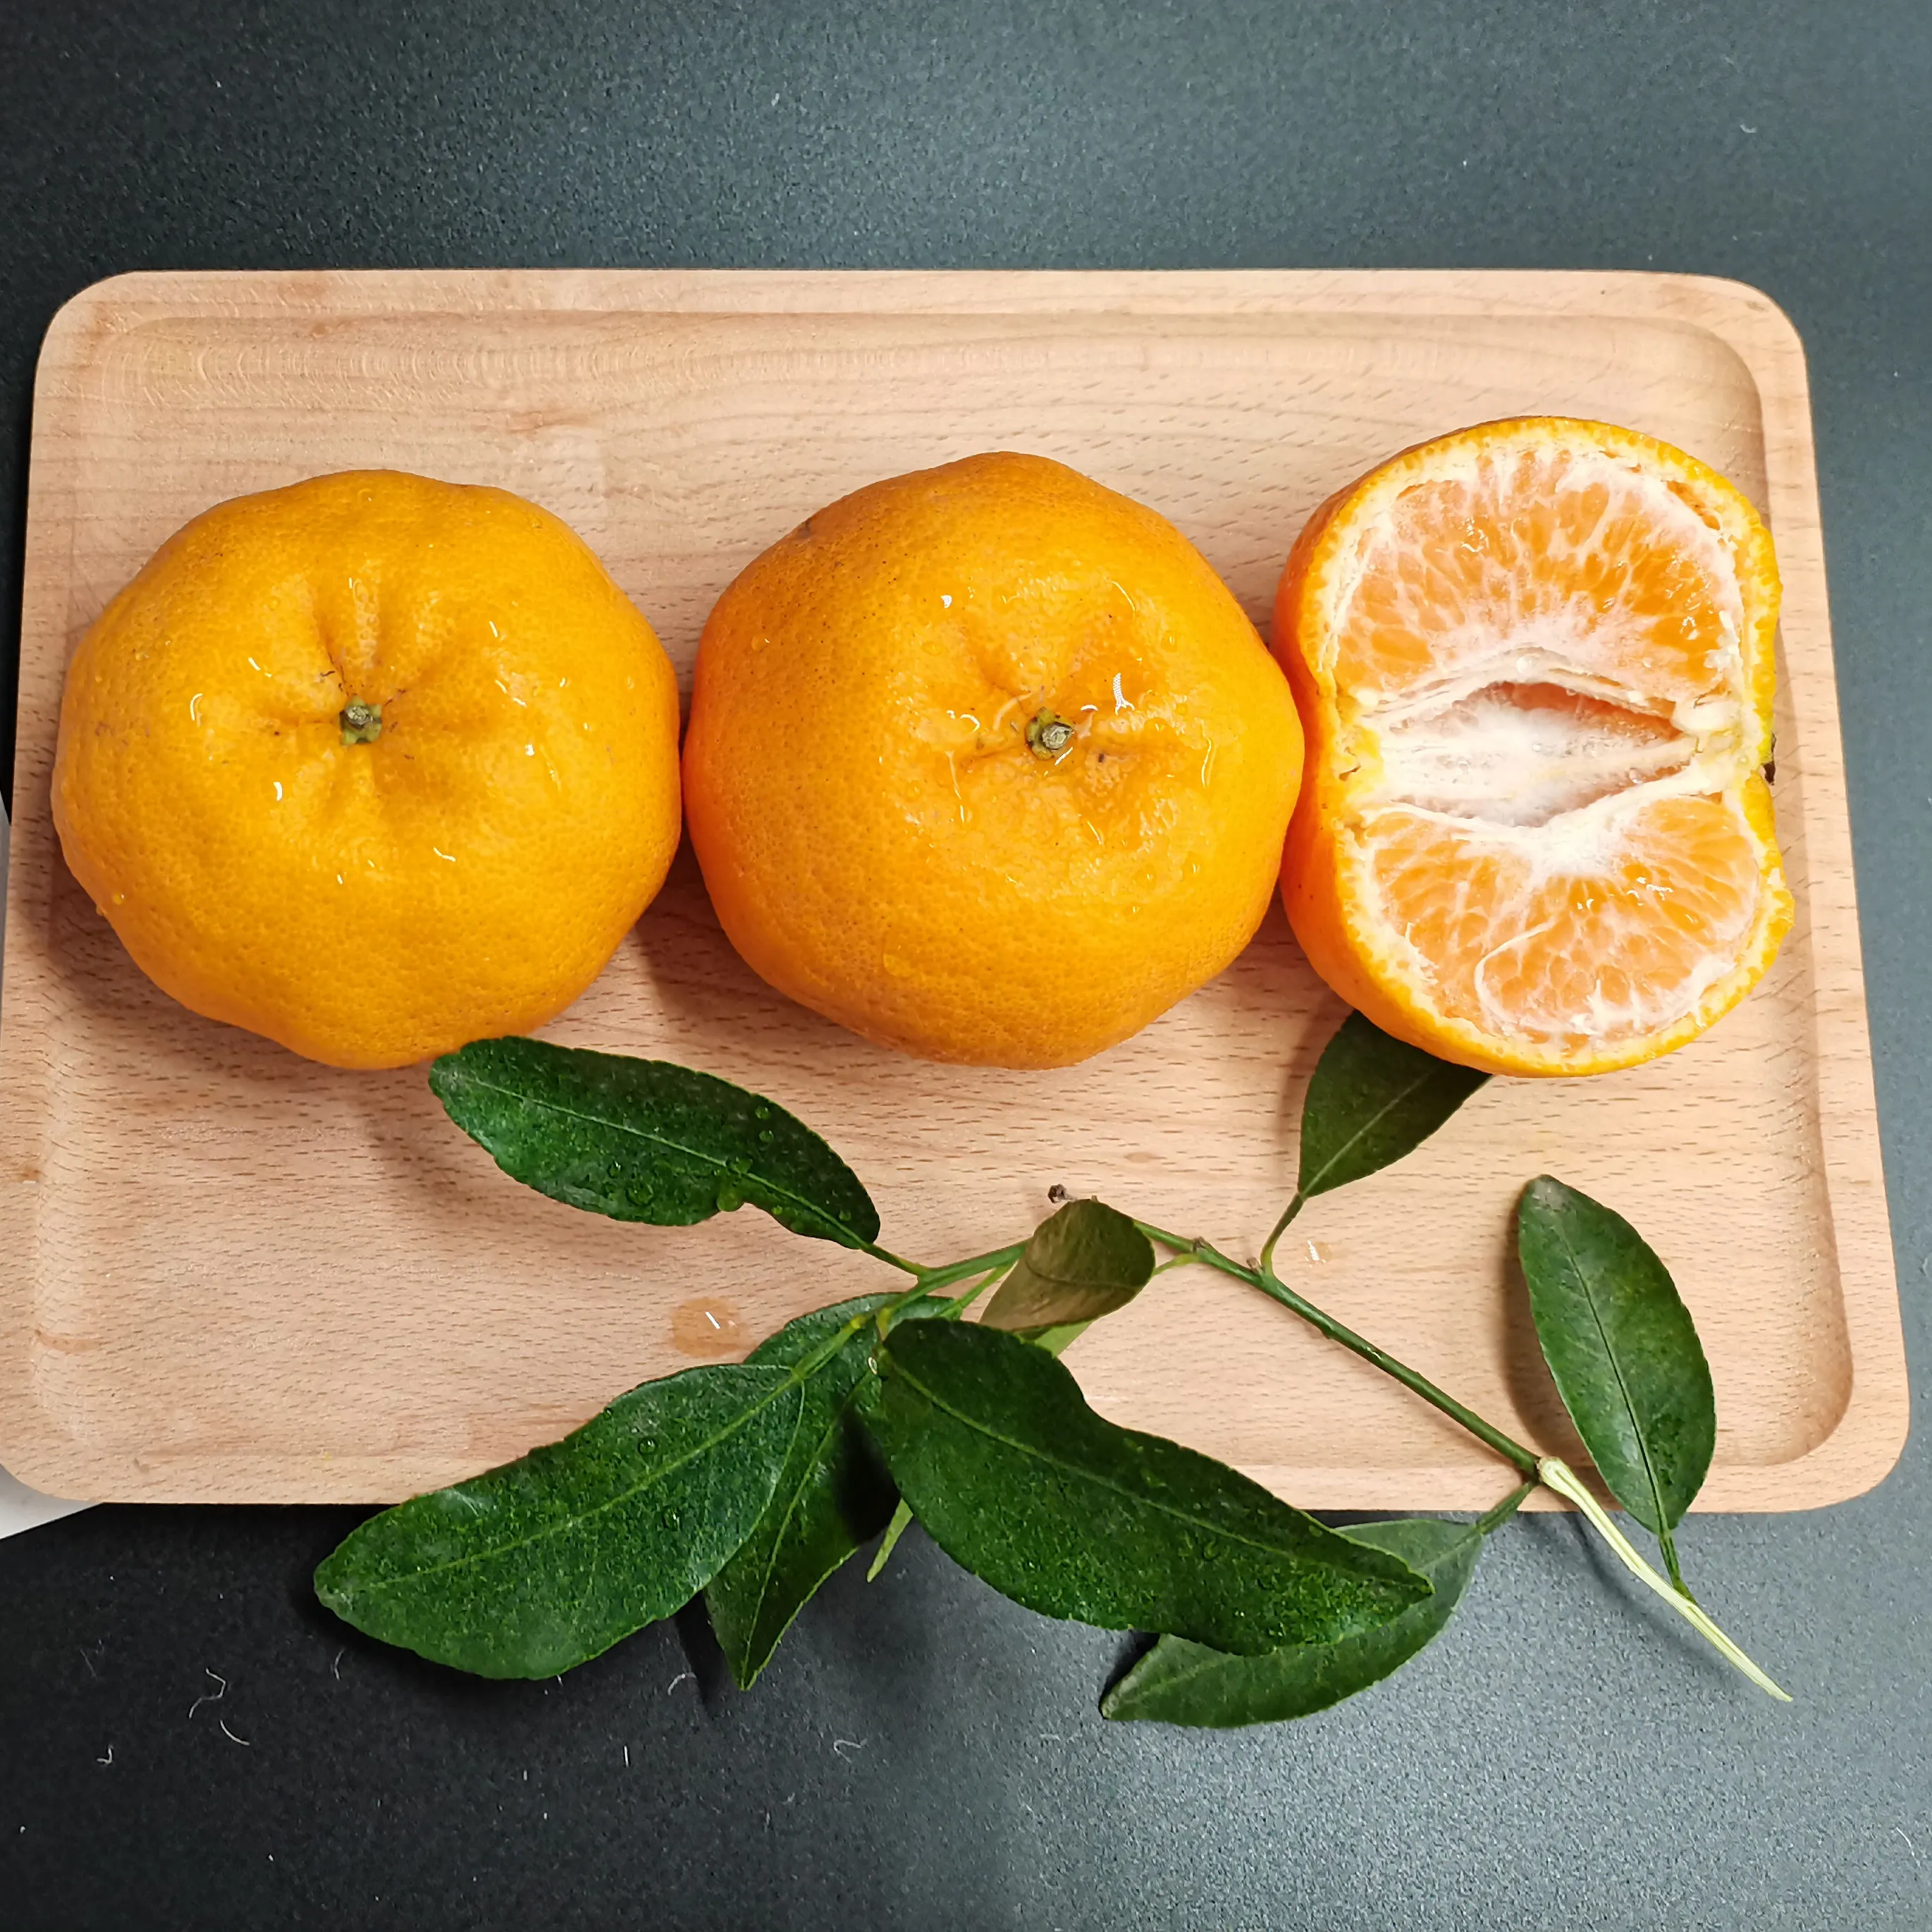 Jaffa oranges Australia price + wholesale and cheap packing specifications